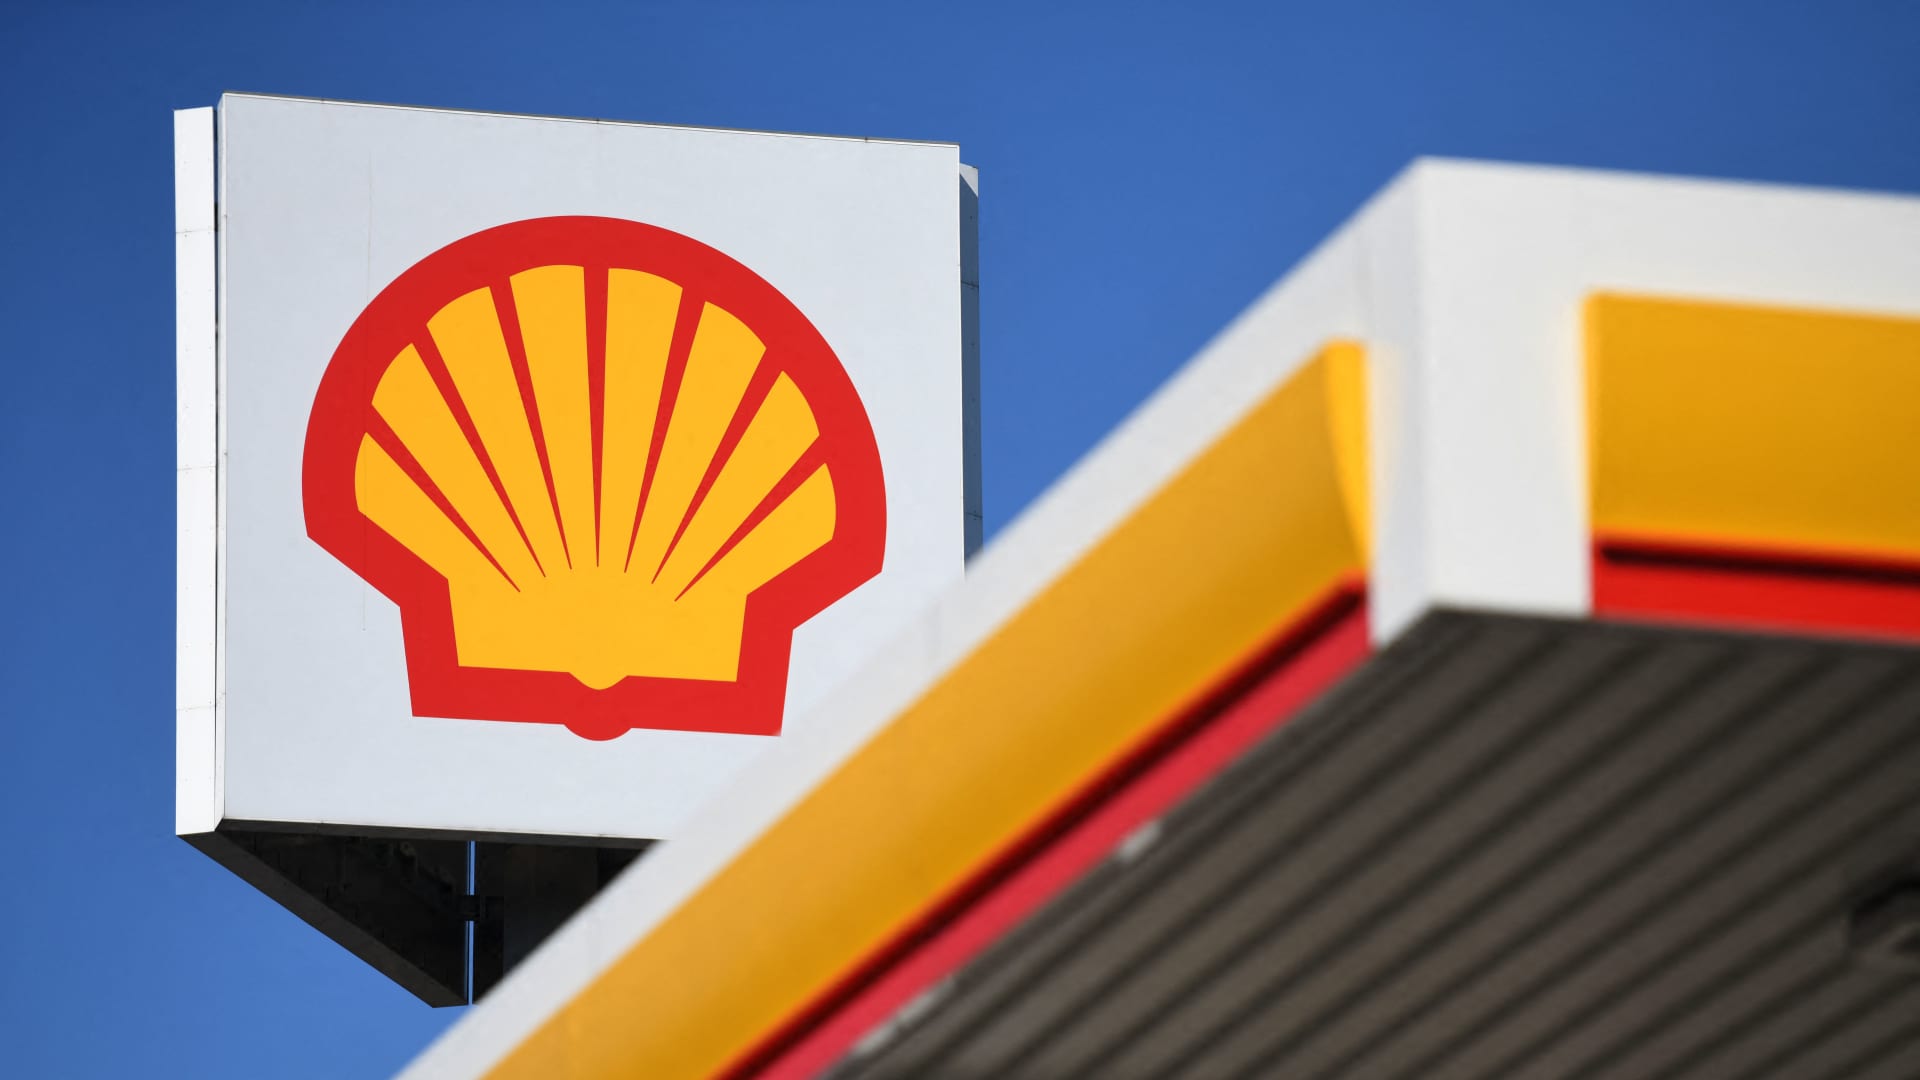 Shell CEO Ben van Beurden to be replaced by Wael Sawan next year